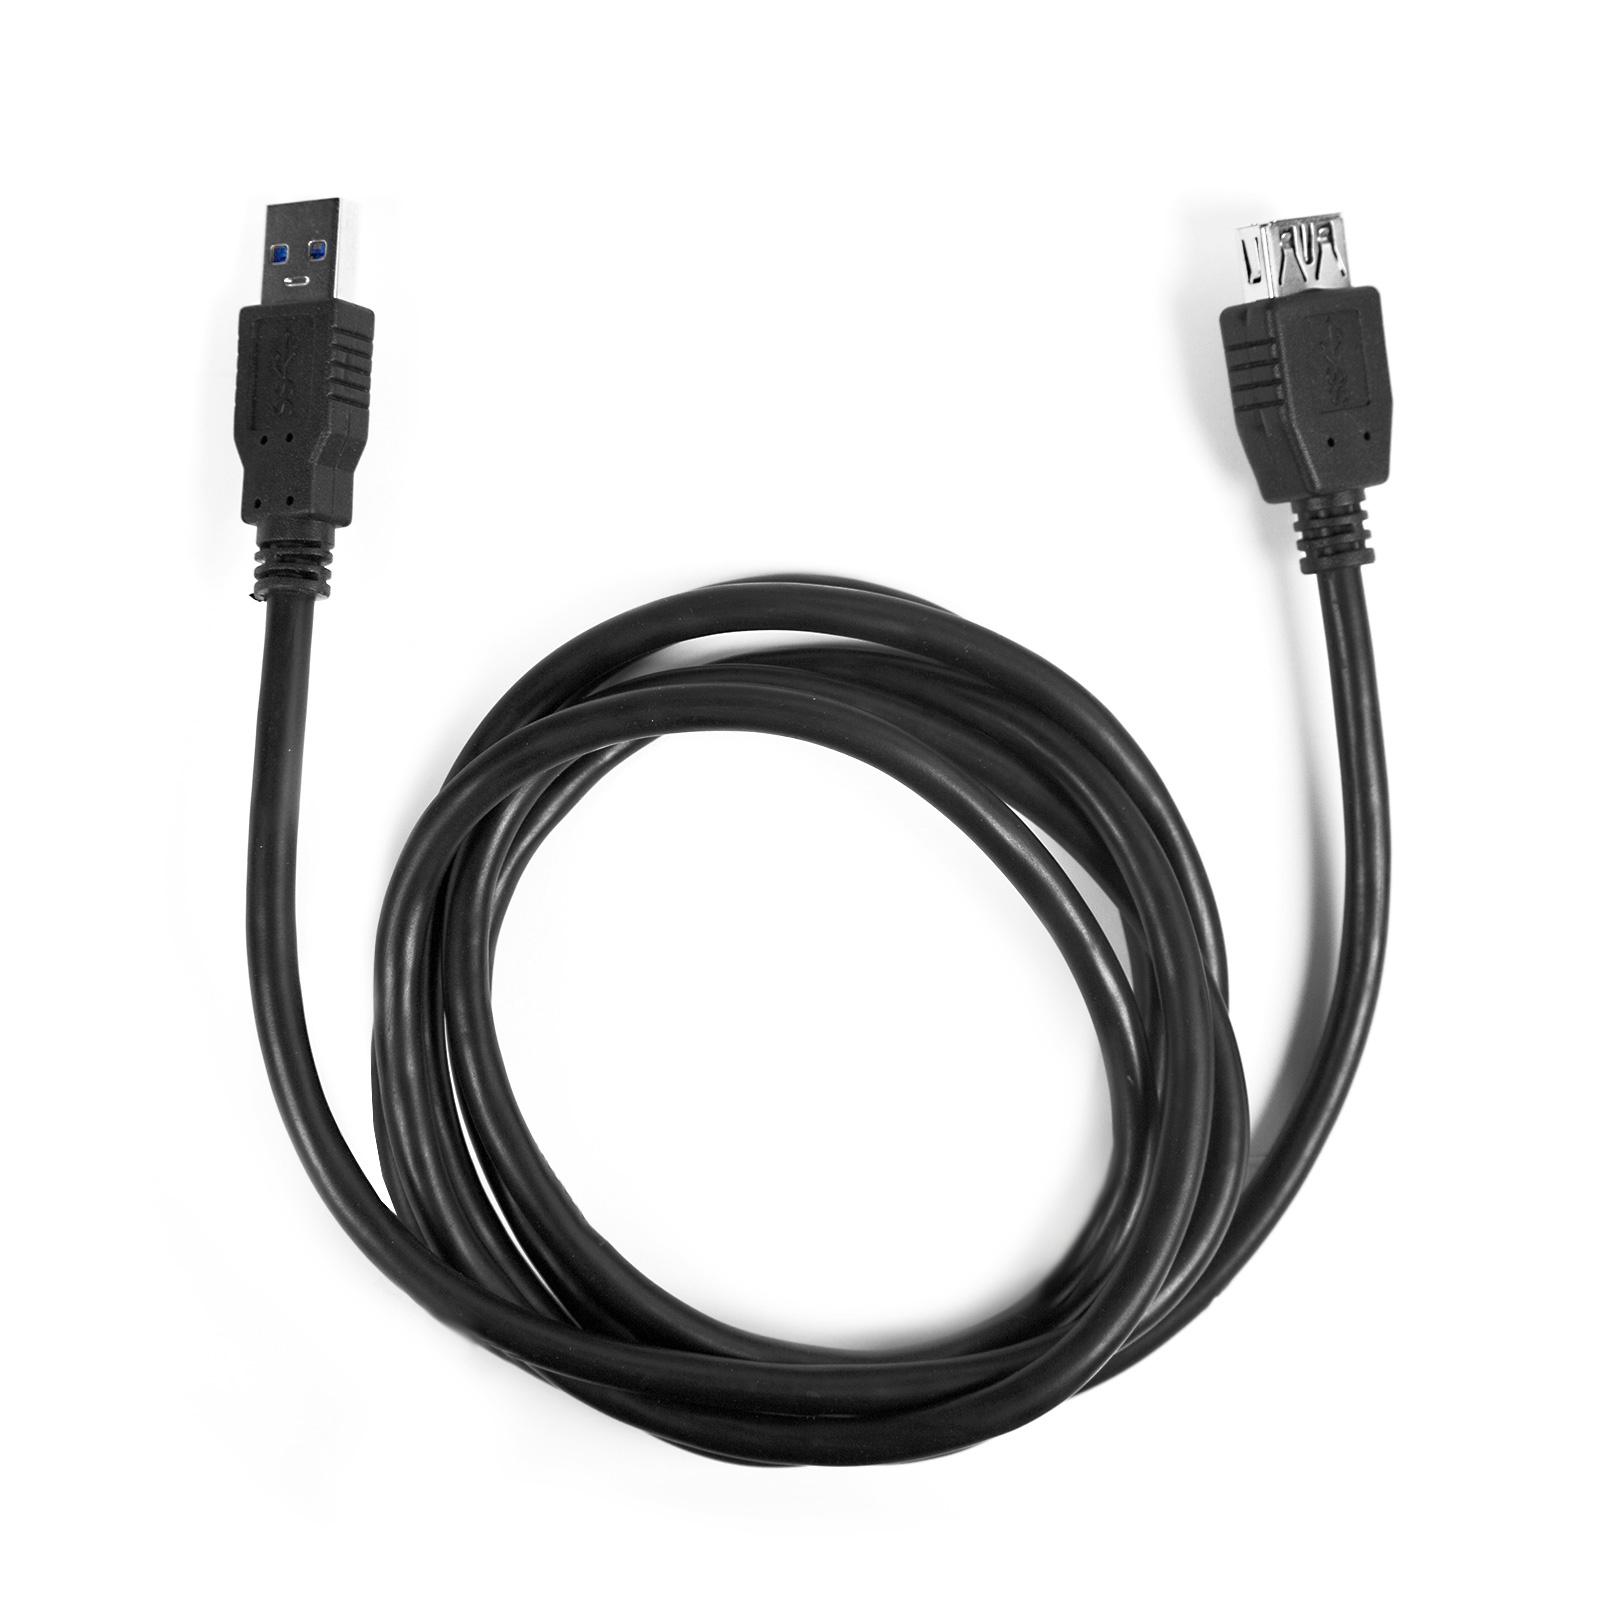 EKON USB extension cable 2.0 type A male to type A female length 3 m. nickel plated     OD=4.0mm                        